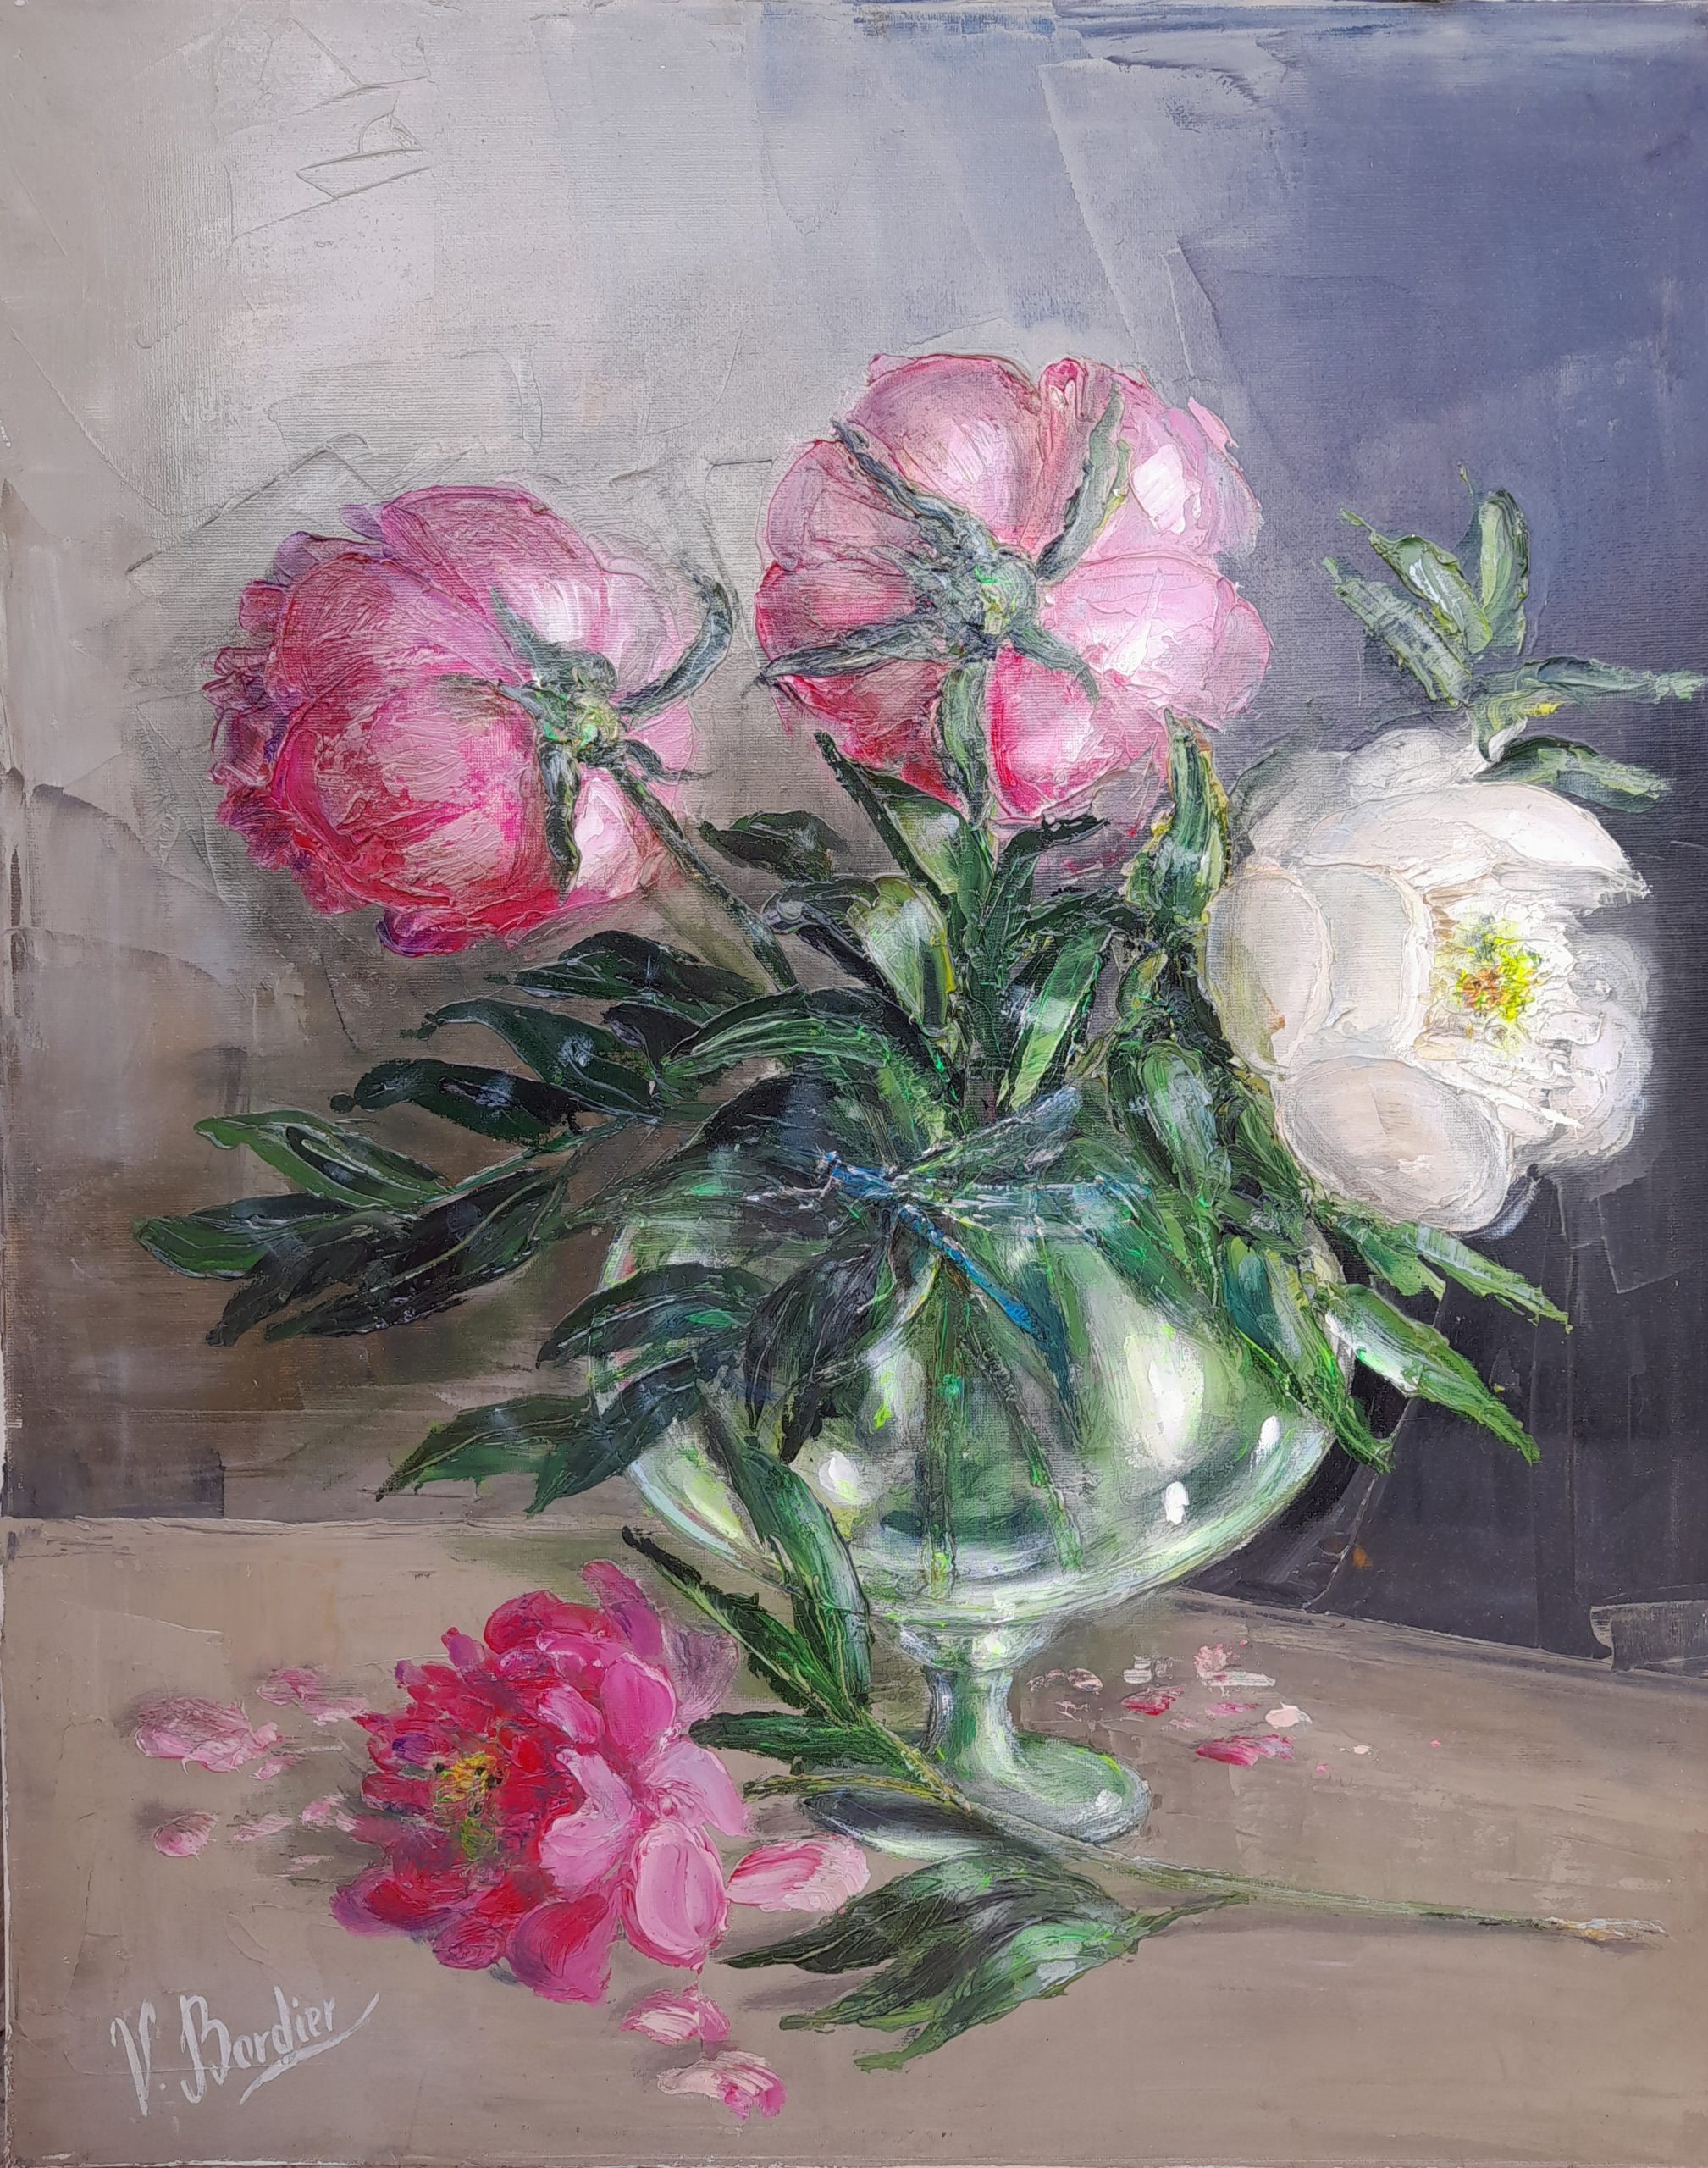 Peonies and Dragonfly, Victoria Bordier - Exquisite Art